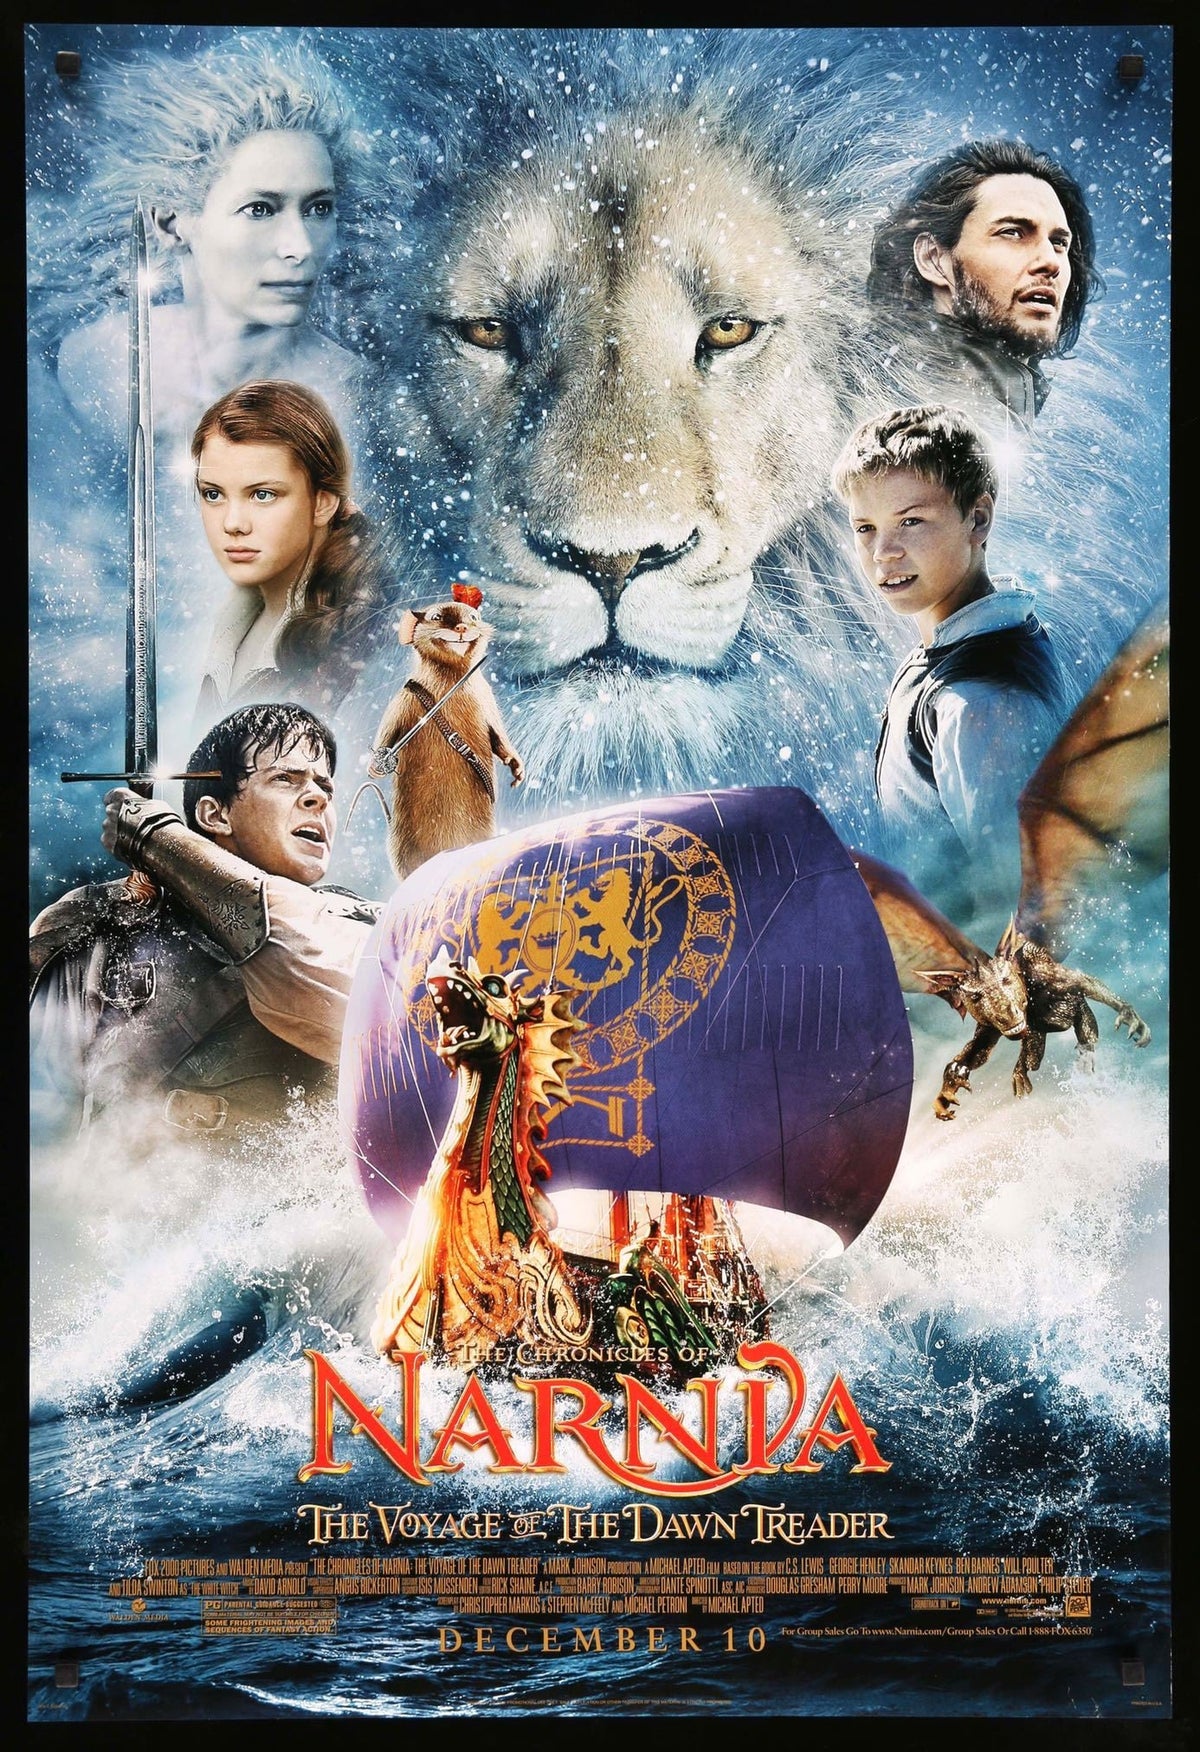 Chronicles of Narnia: The Voyage of the Dawn Treader (2010) original movie poster for sale at Original Film Art